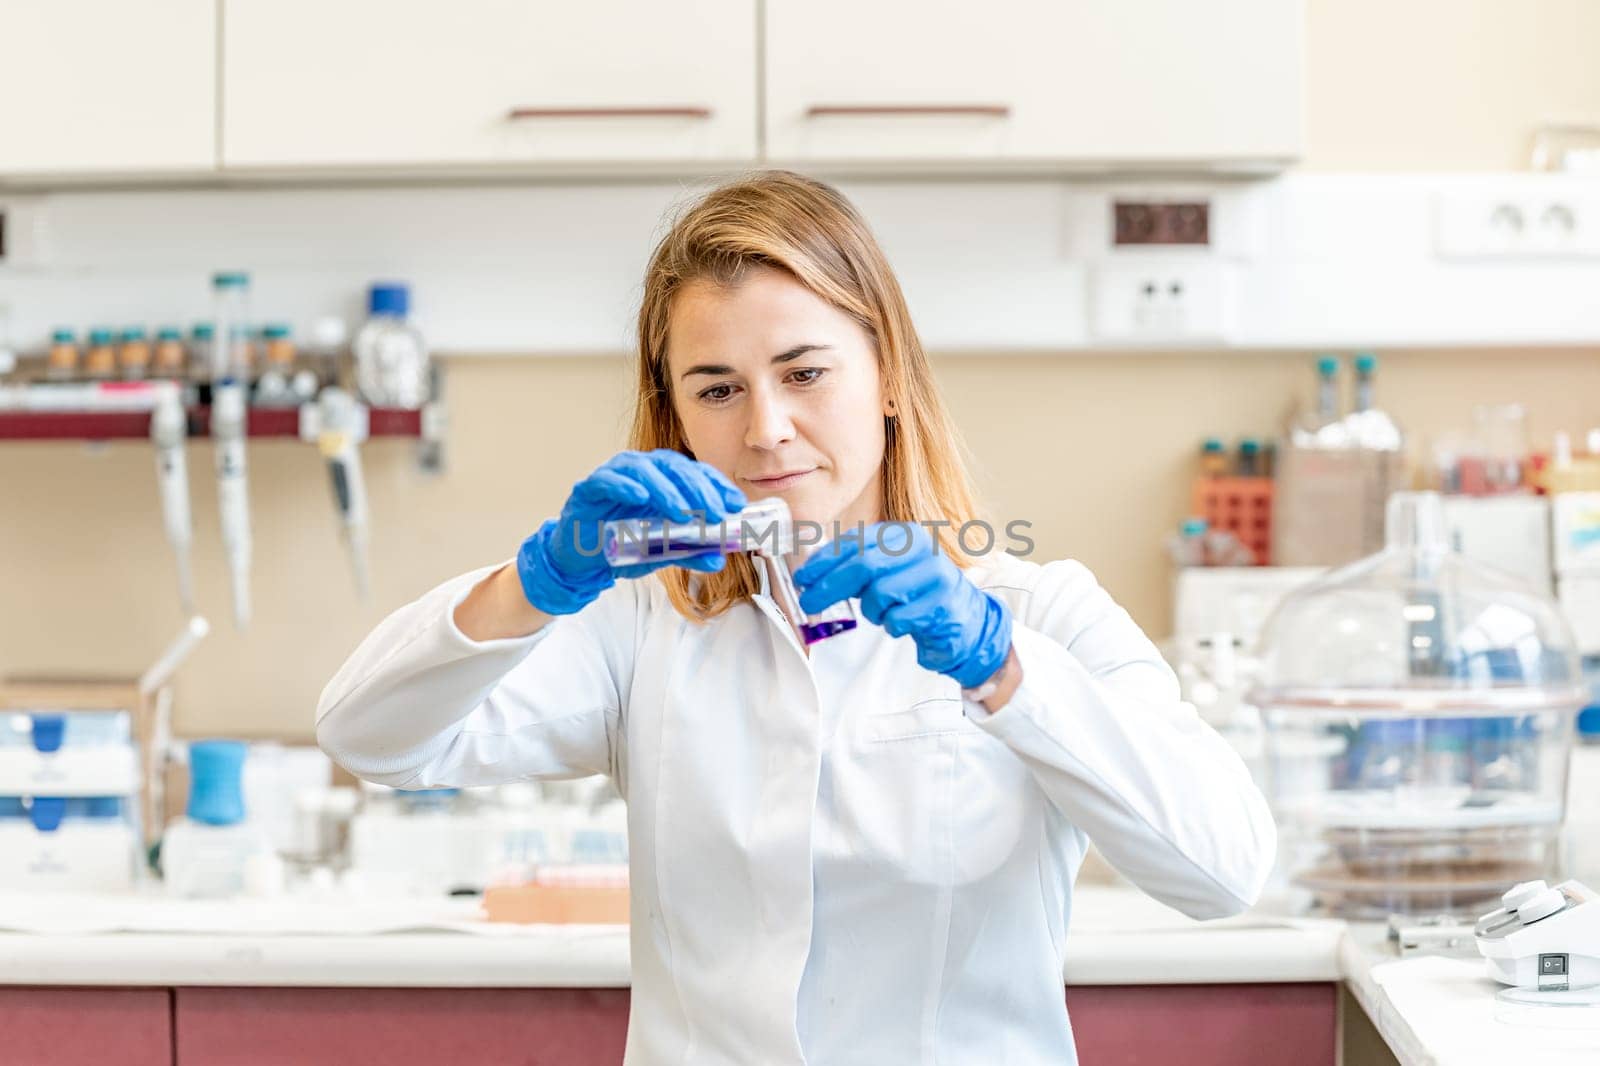 young attractive female scientist examines chemical samples of substances and drugs in a research laboratory by Edophoto